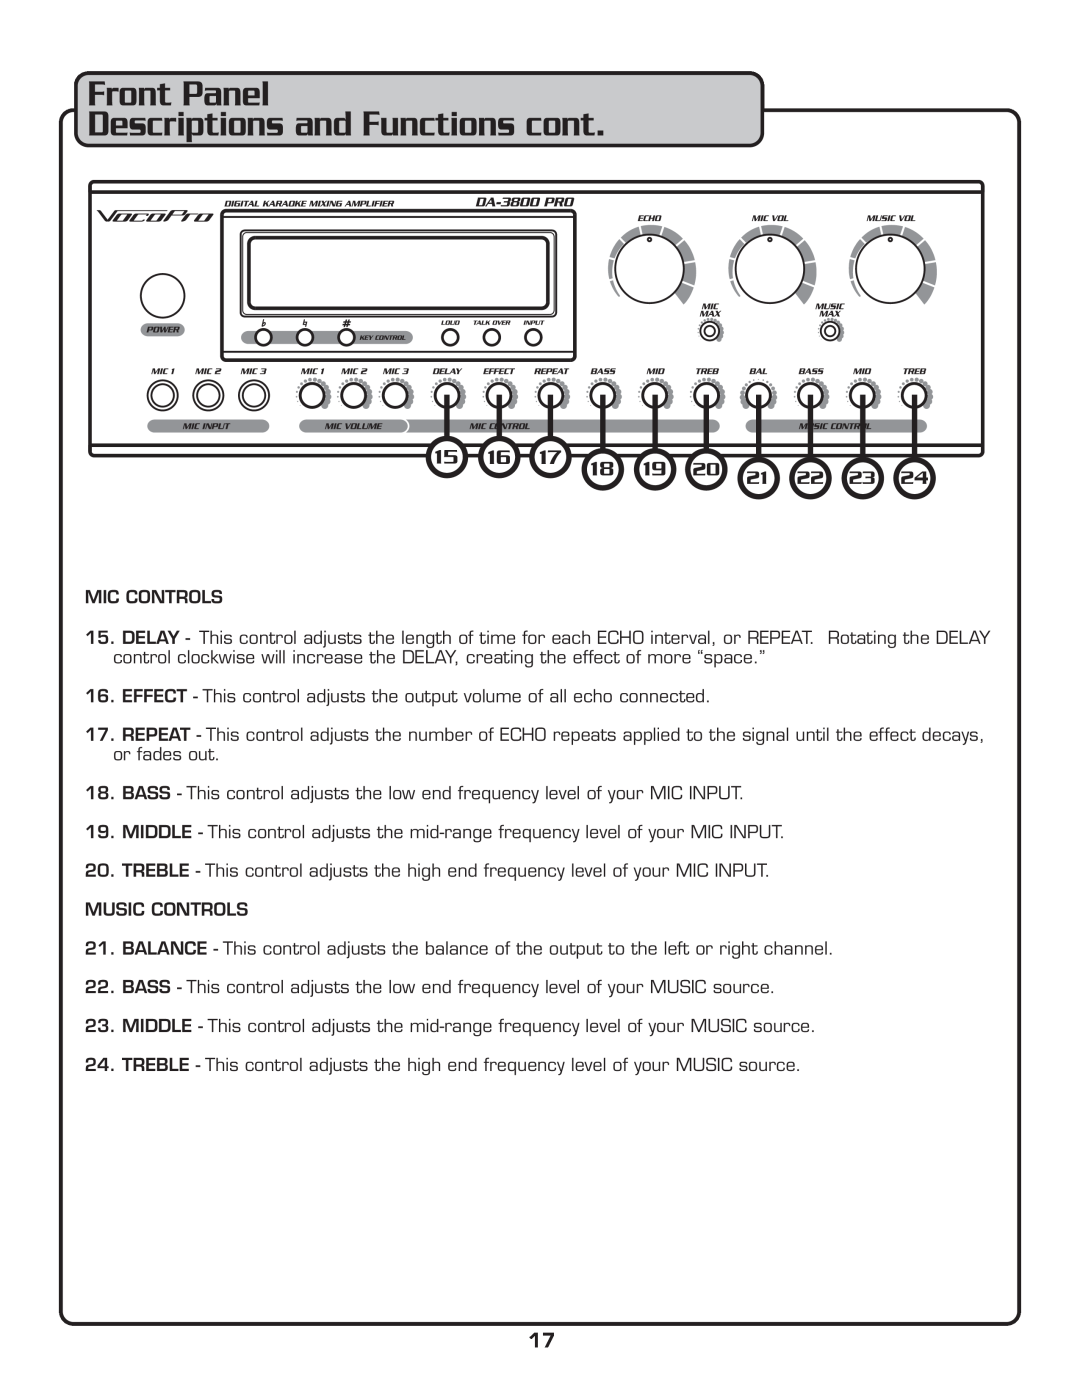 VocoPro DA-3800 PRO owner manual Front Panel Descriptions and Functions cont, Mic Controls 